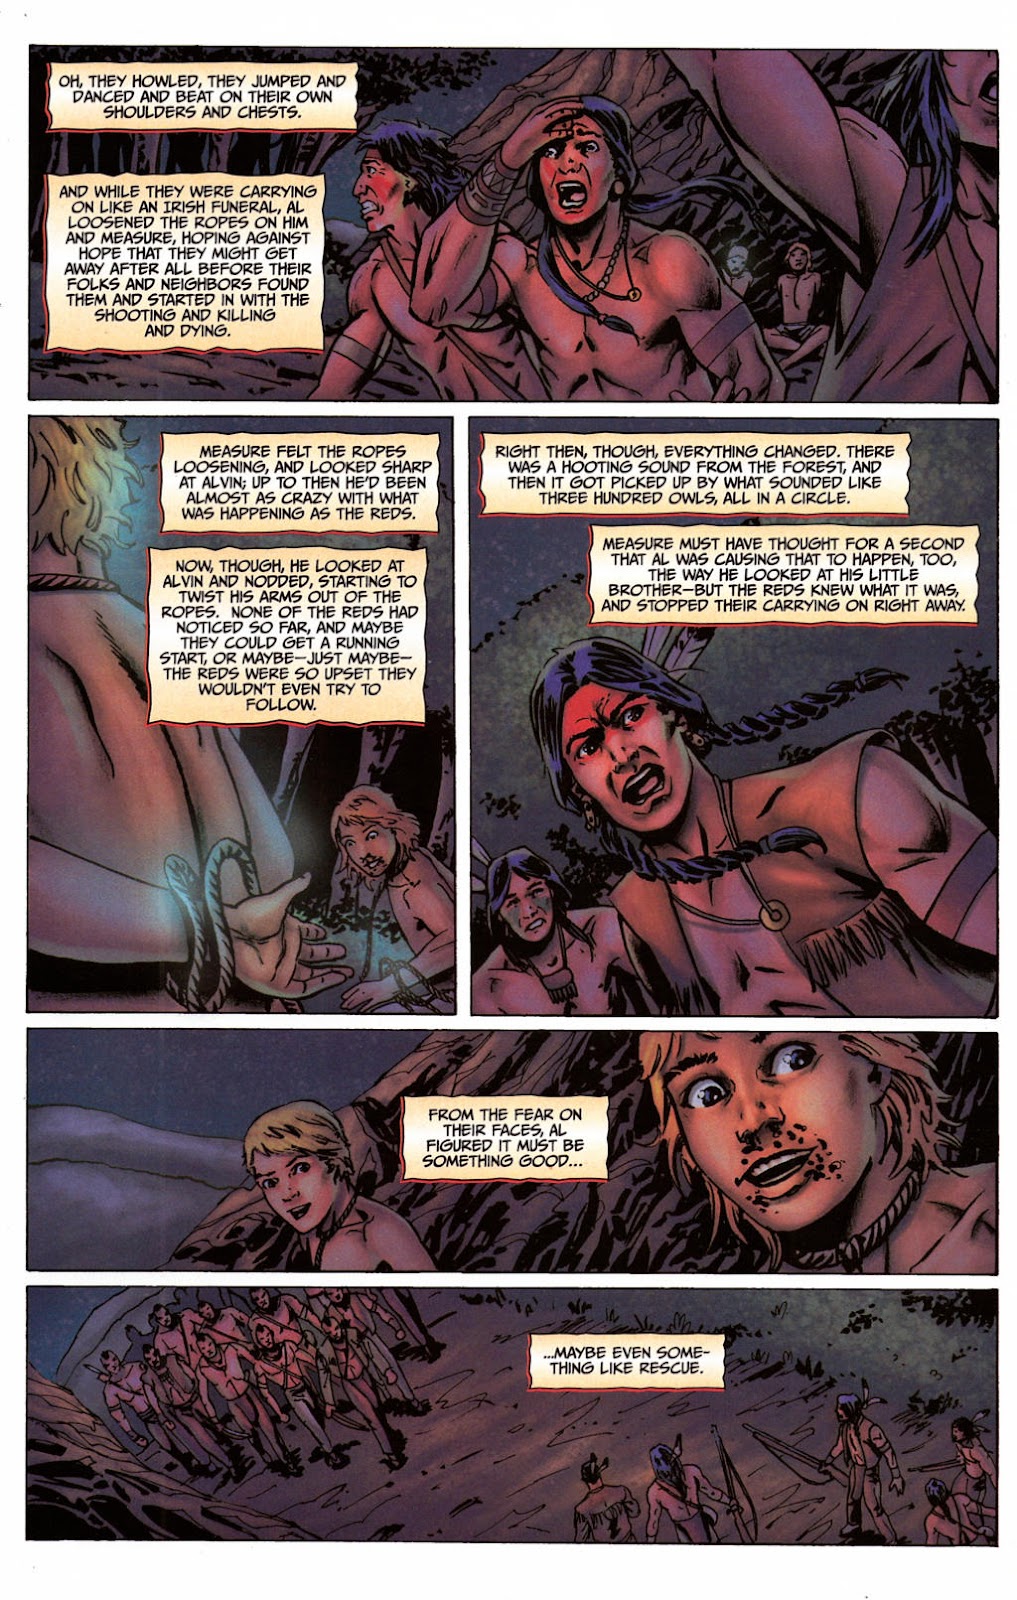 Red Prophet: The Tales of Alvin Maker issue 5 - Page 16